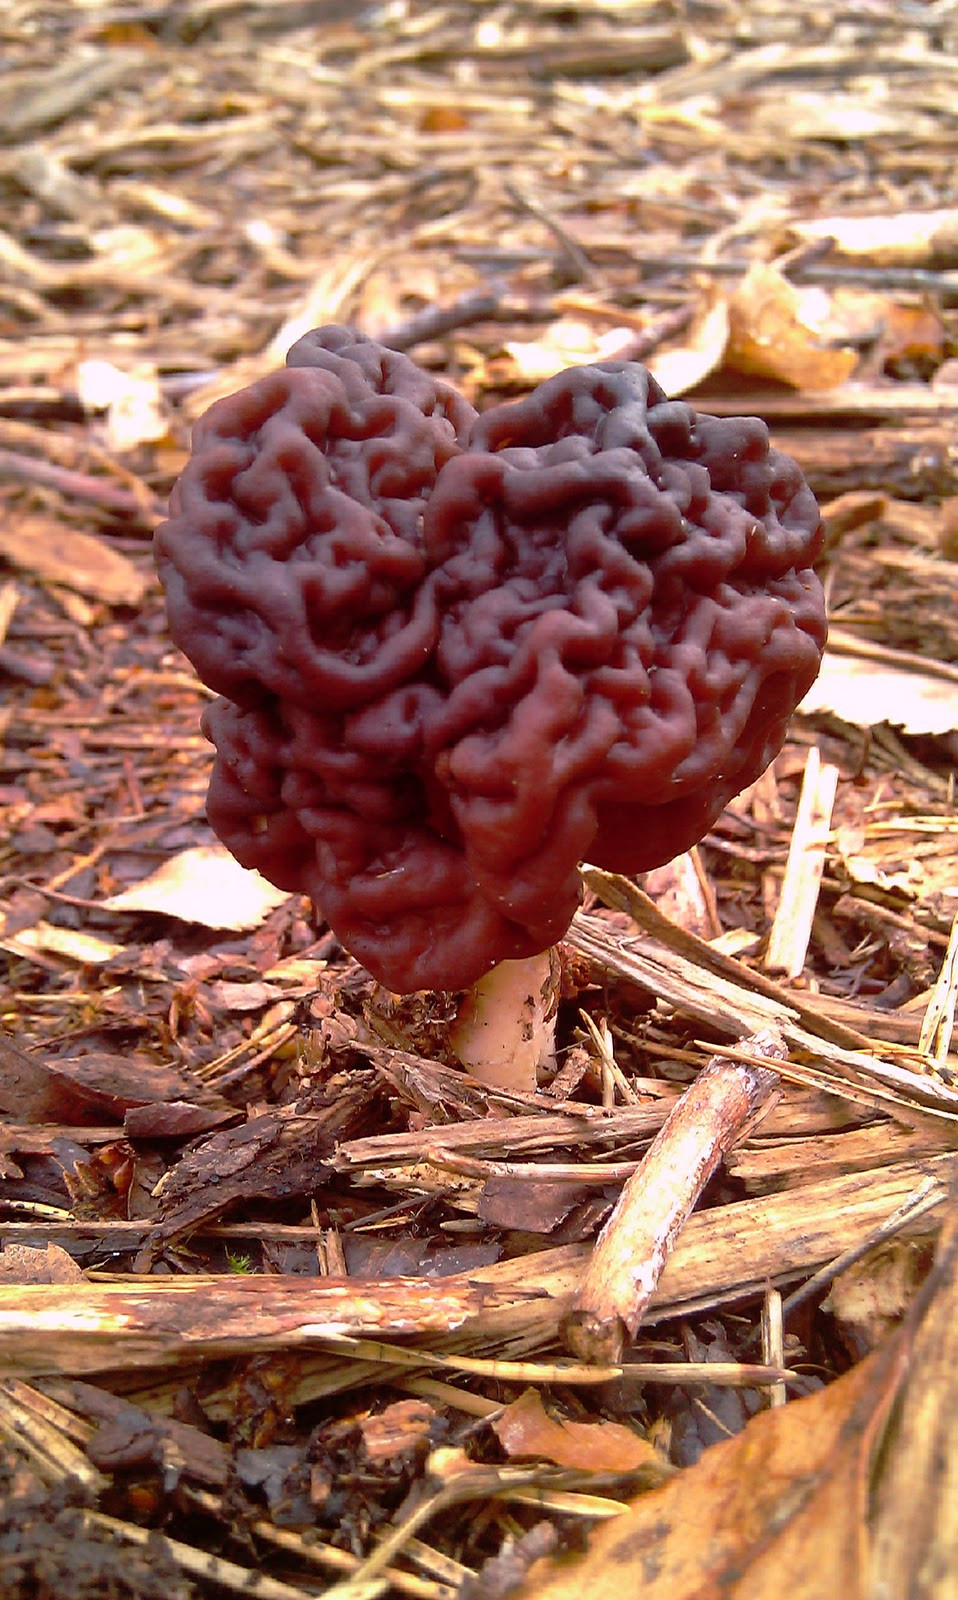 Pictures Of Morel Mushrooms
 Beauty in small things The deadly false morel mushroom